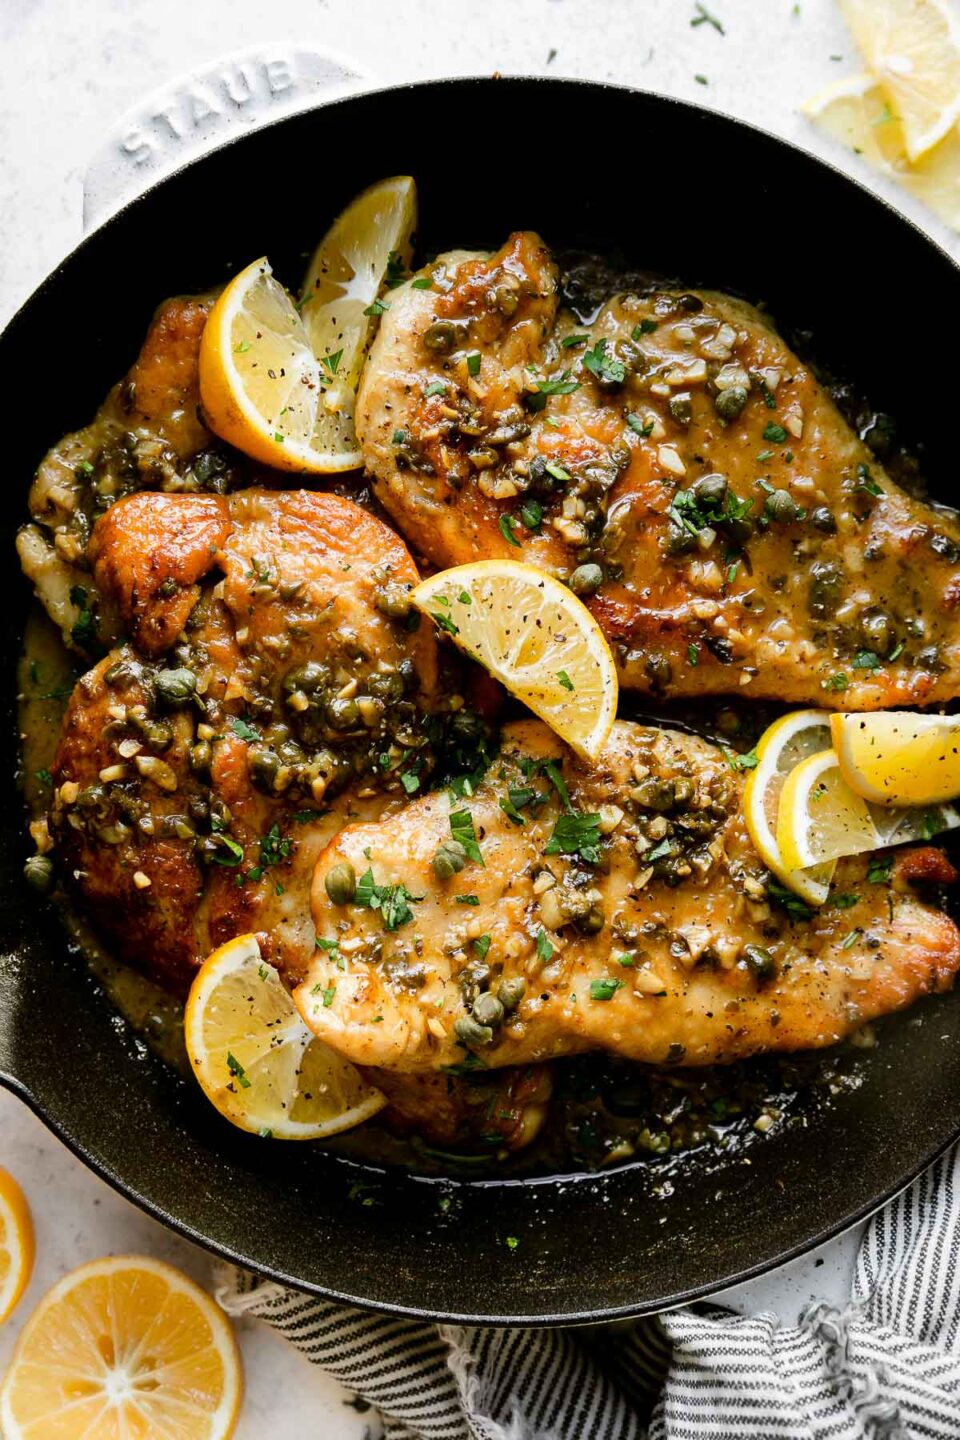 A white Staub cast iron skillet sits atop a creamy white textured surface filled with finished Meyer Lemon Chicken Piccata. The chicken cutlets have had Meyer Lemon pan sauce spooned on top and garnished with chopped fresh herbs and Meyer Lemon wedges. Halved and quartered lemons, loose fresh herbs, and a white and blue linen napkin surround the skillet.